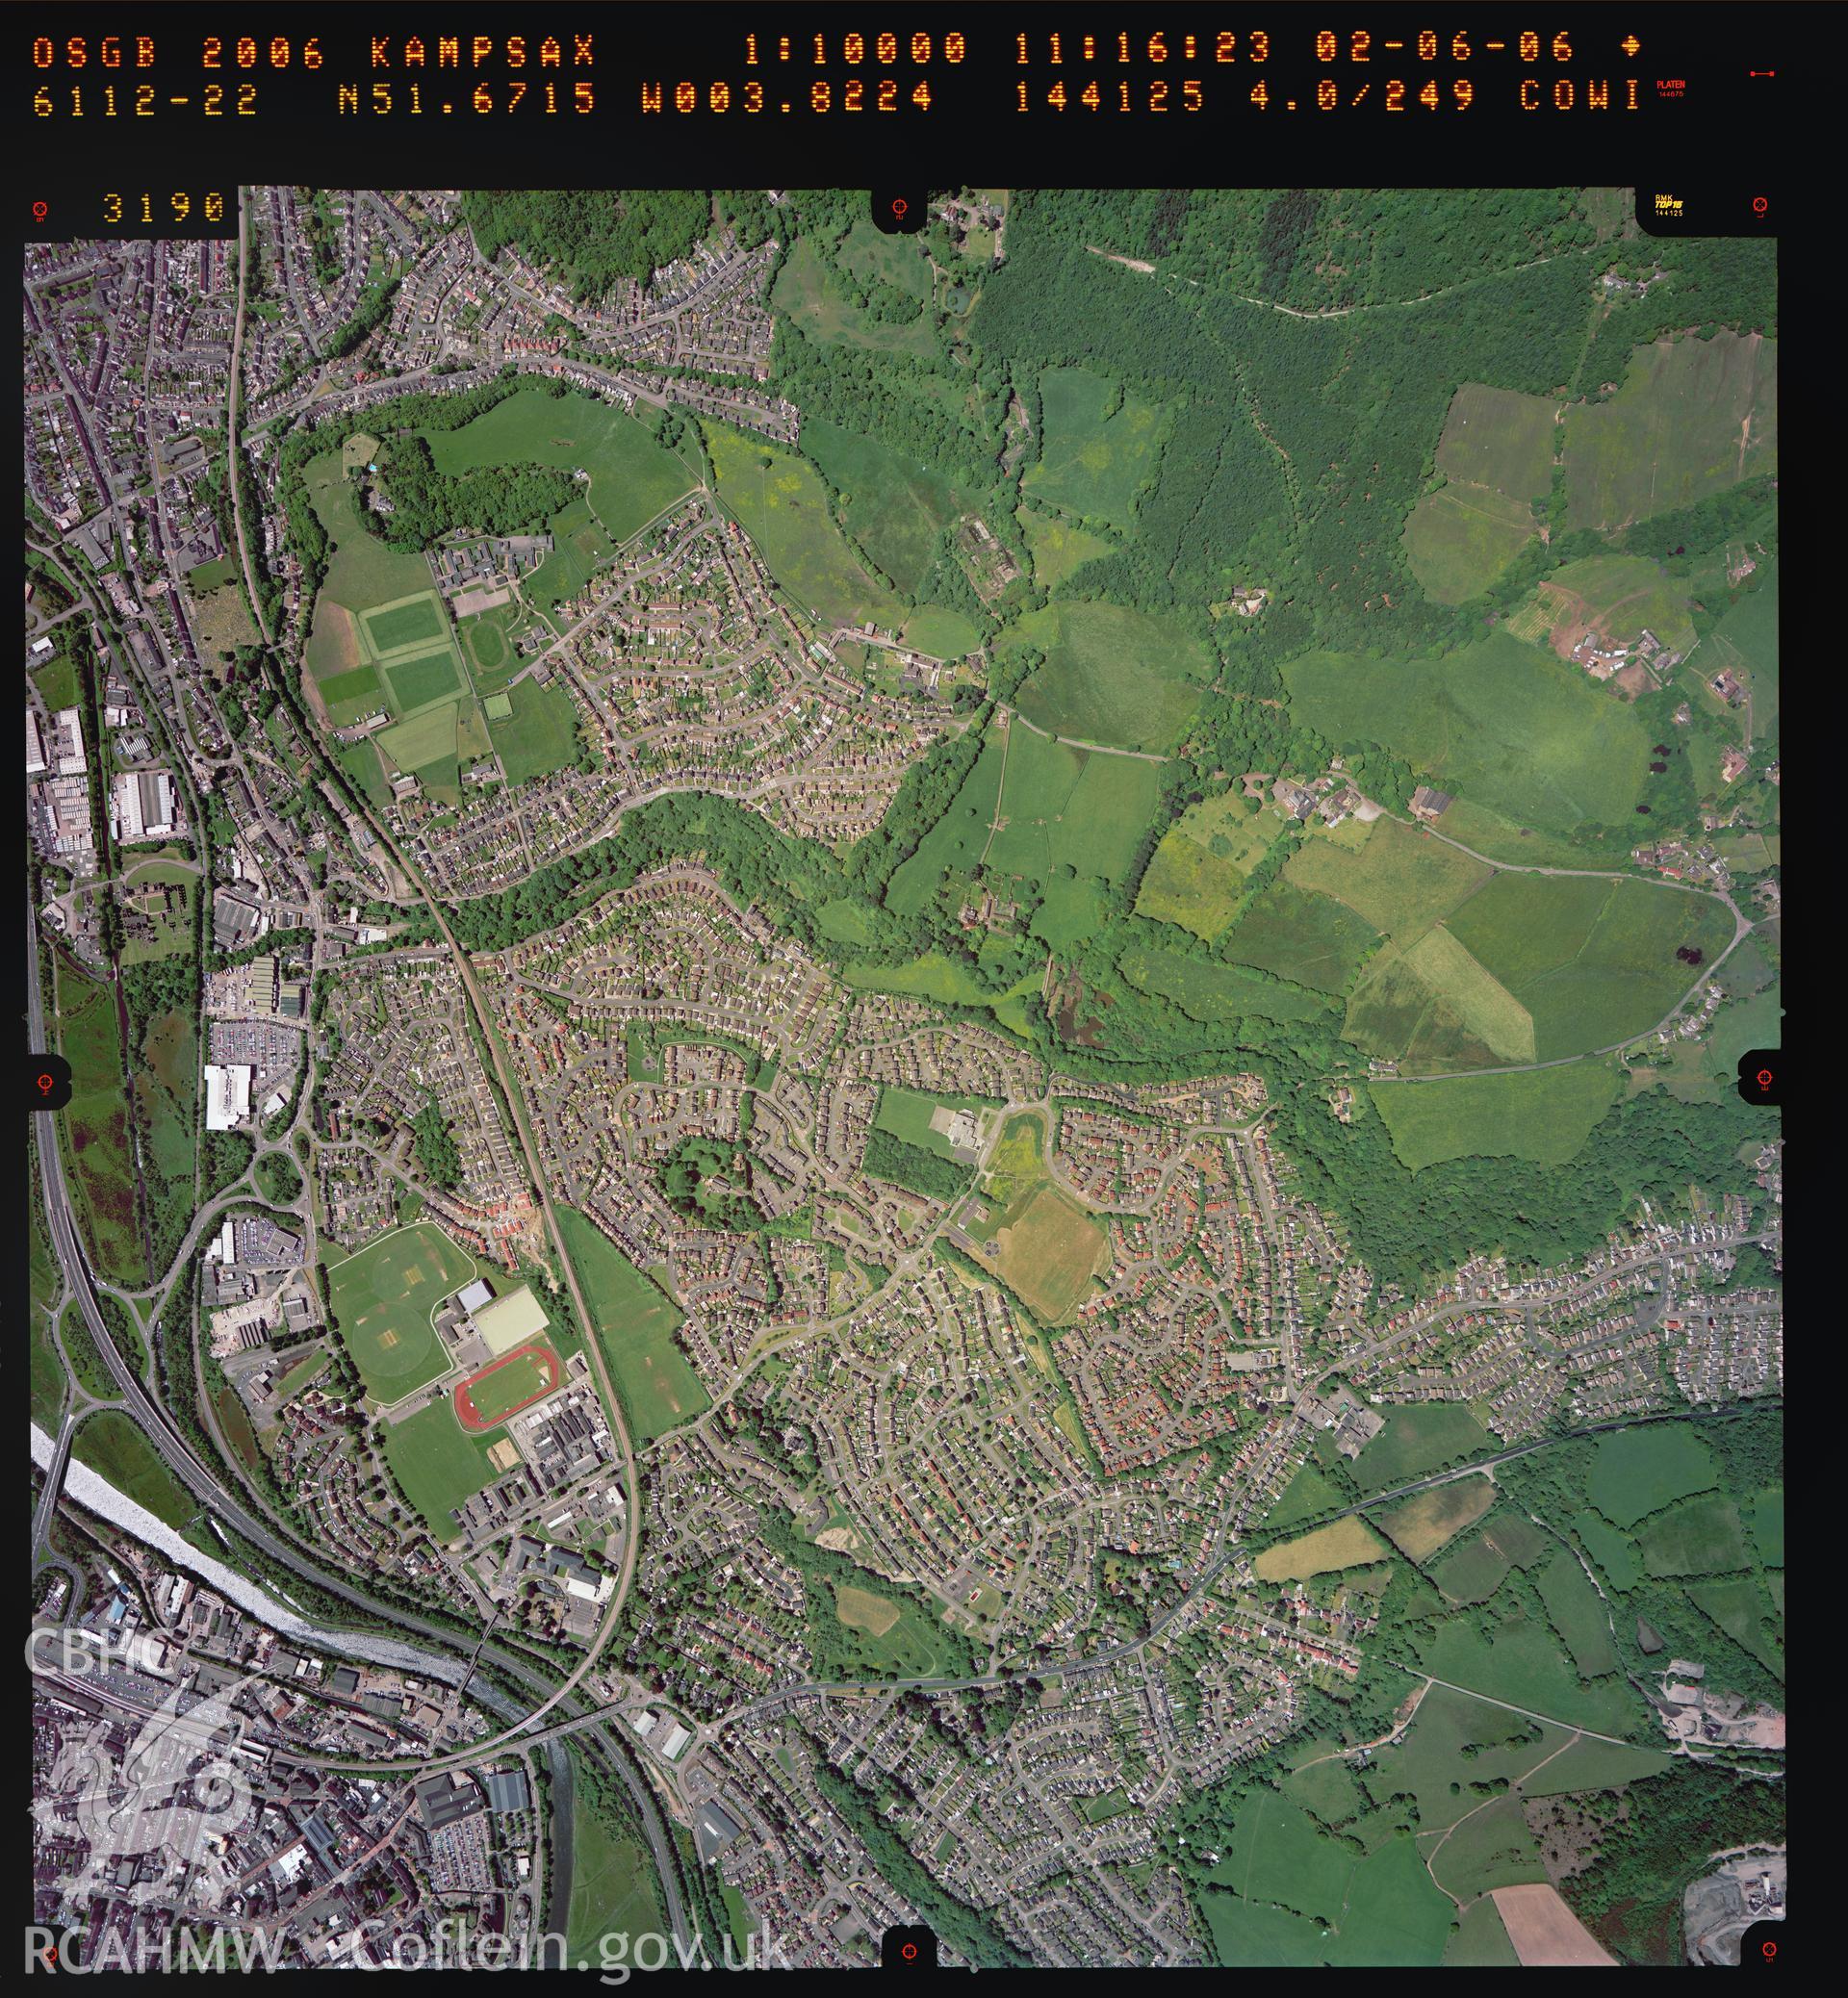 Digitized copy of a colour aerial photograph showing the Neath area, taken by Ordnance Survey, 2006.